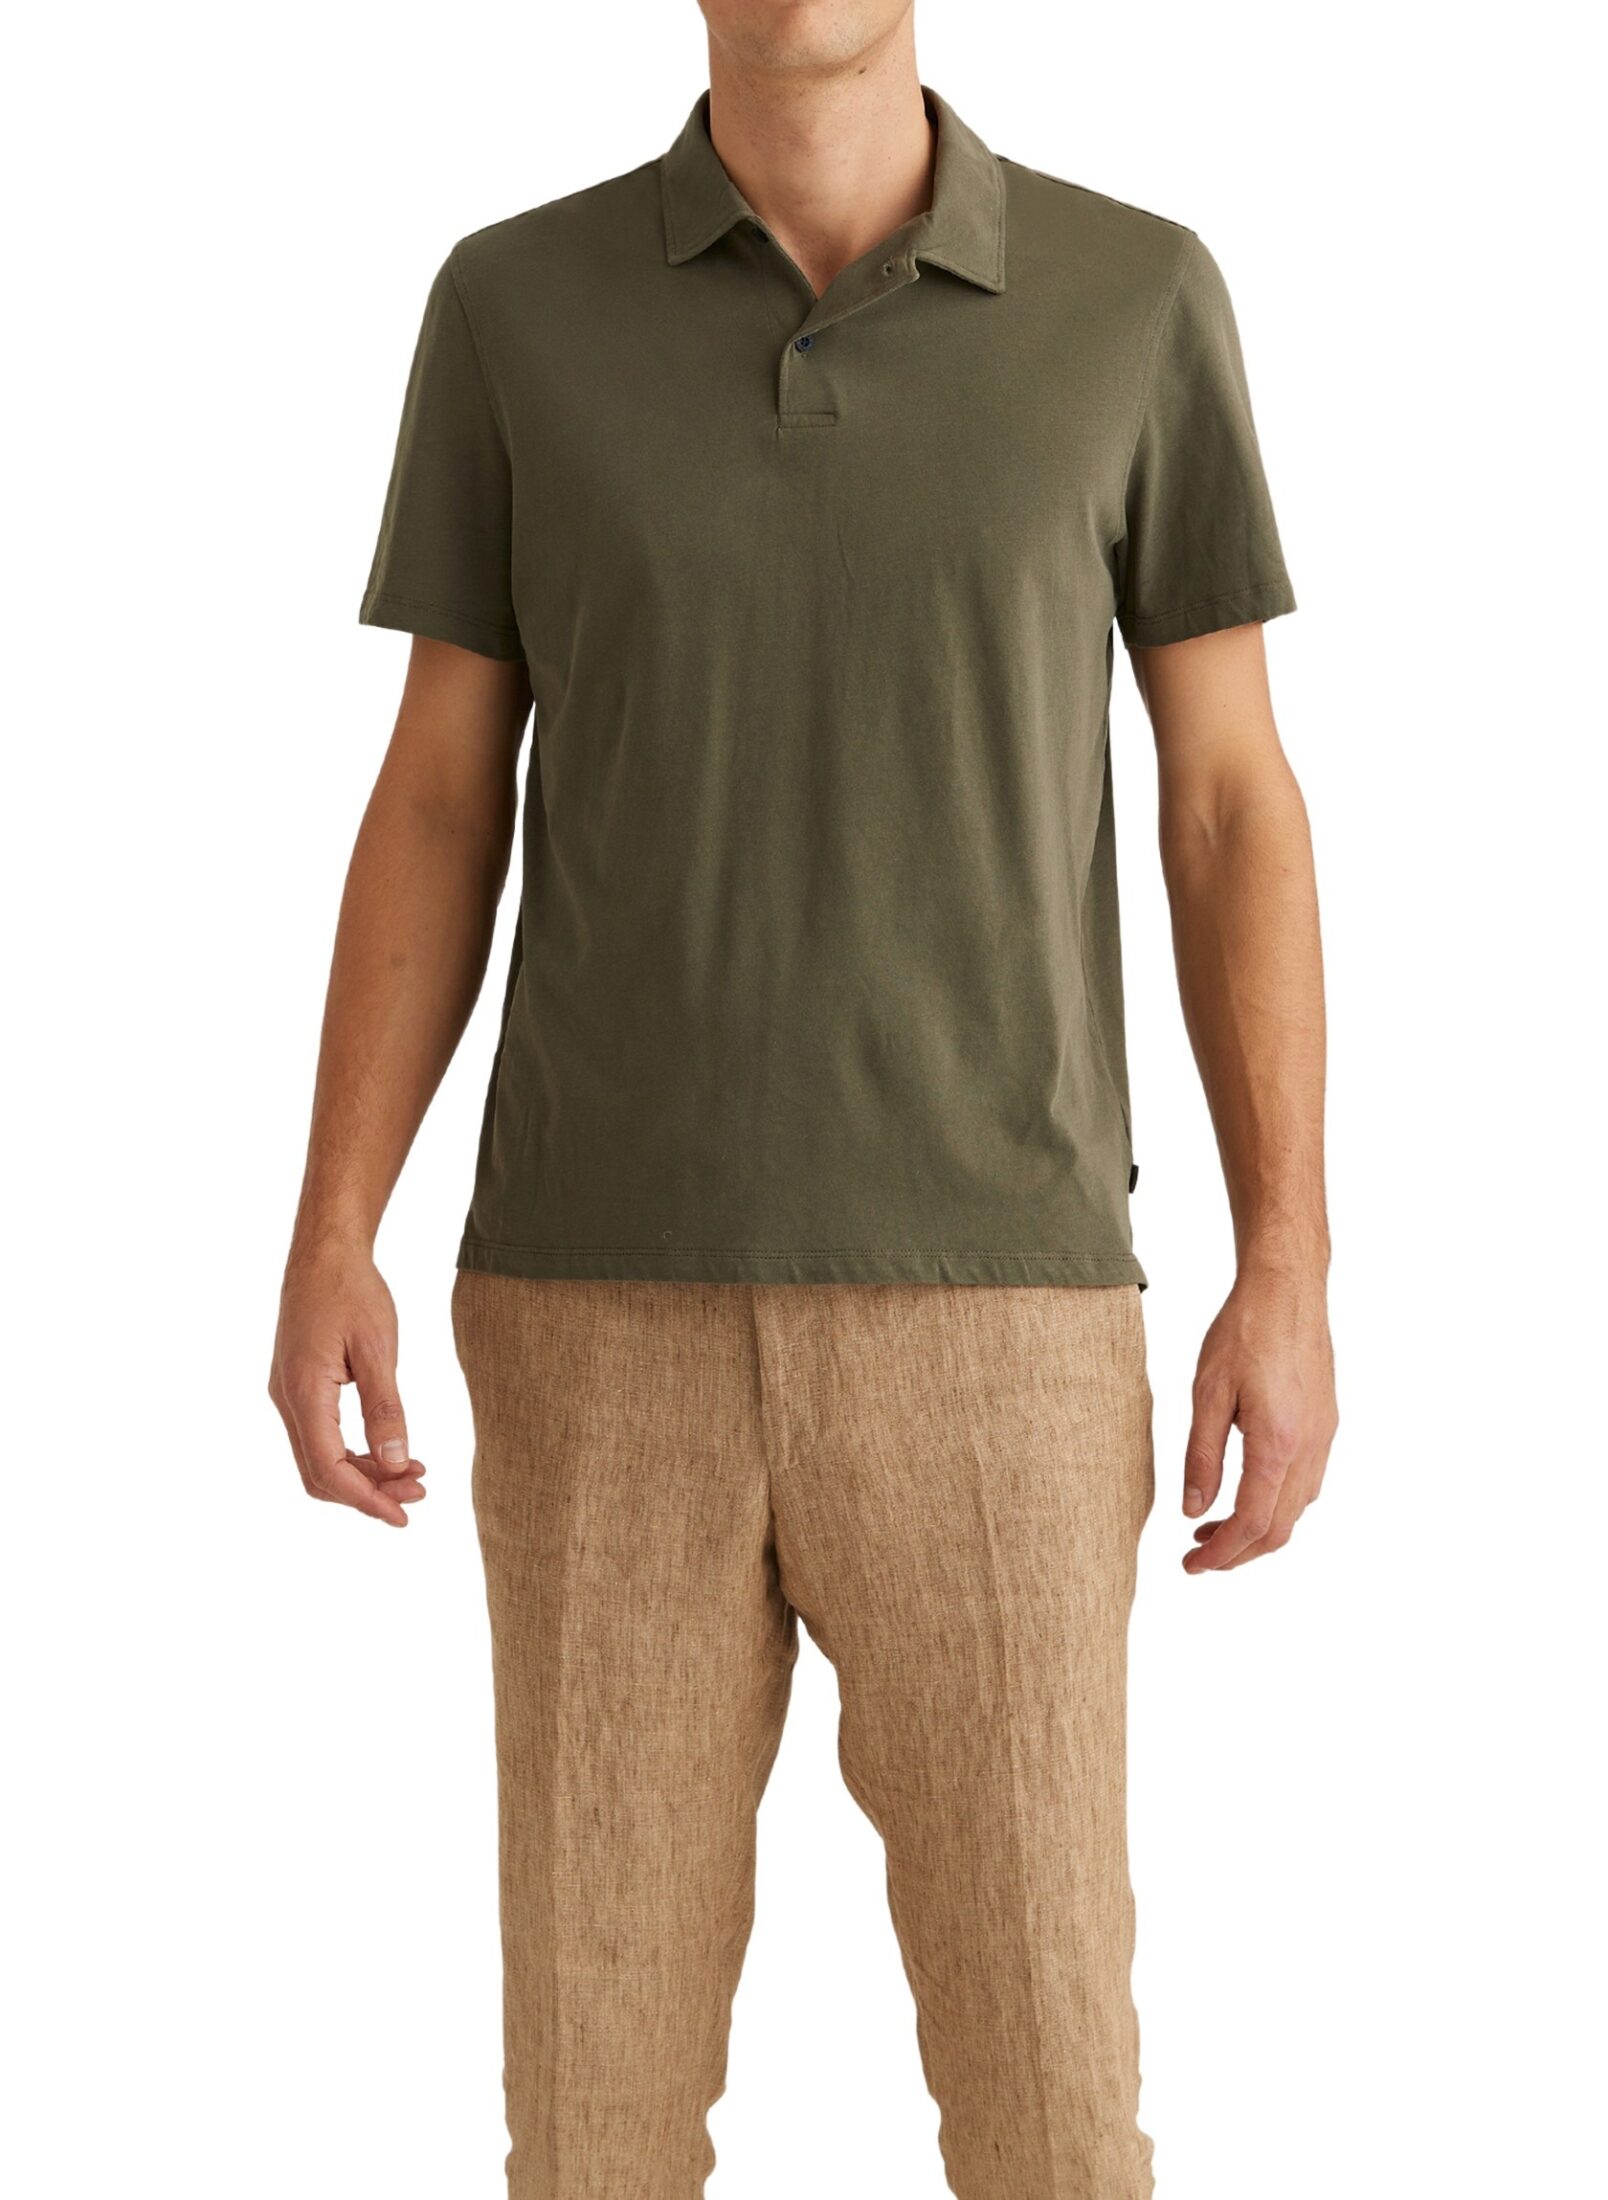 300193-durwin-ss-polo-shirt-77-olive-1